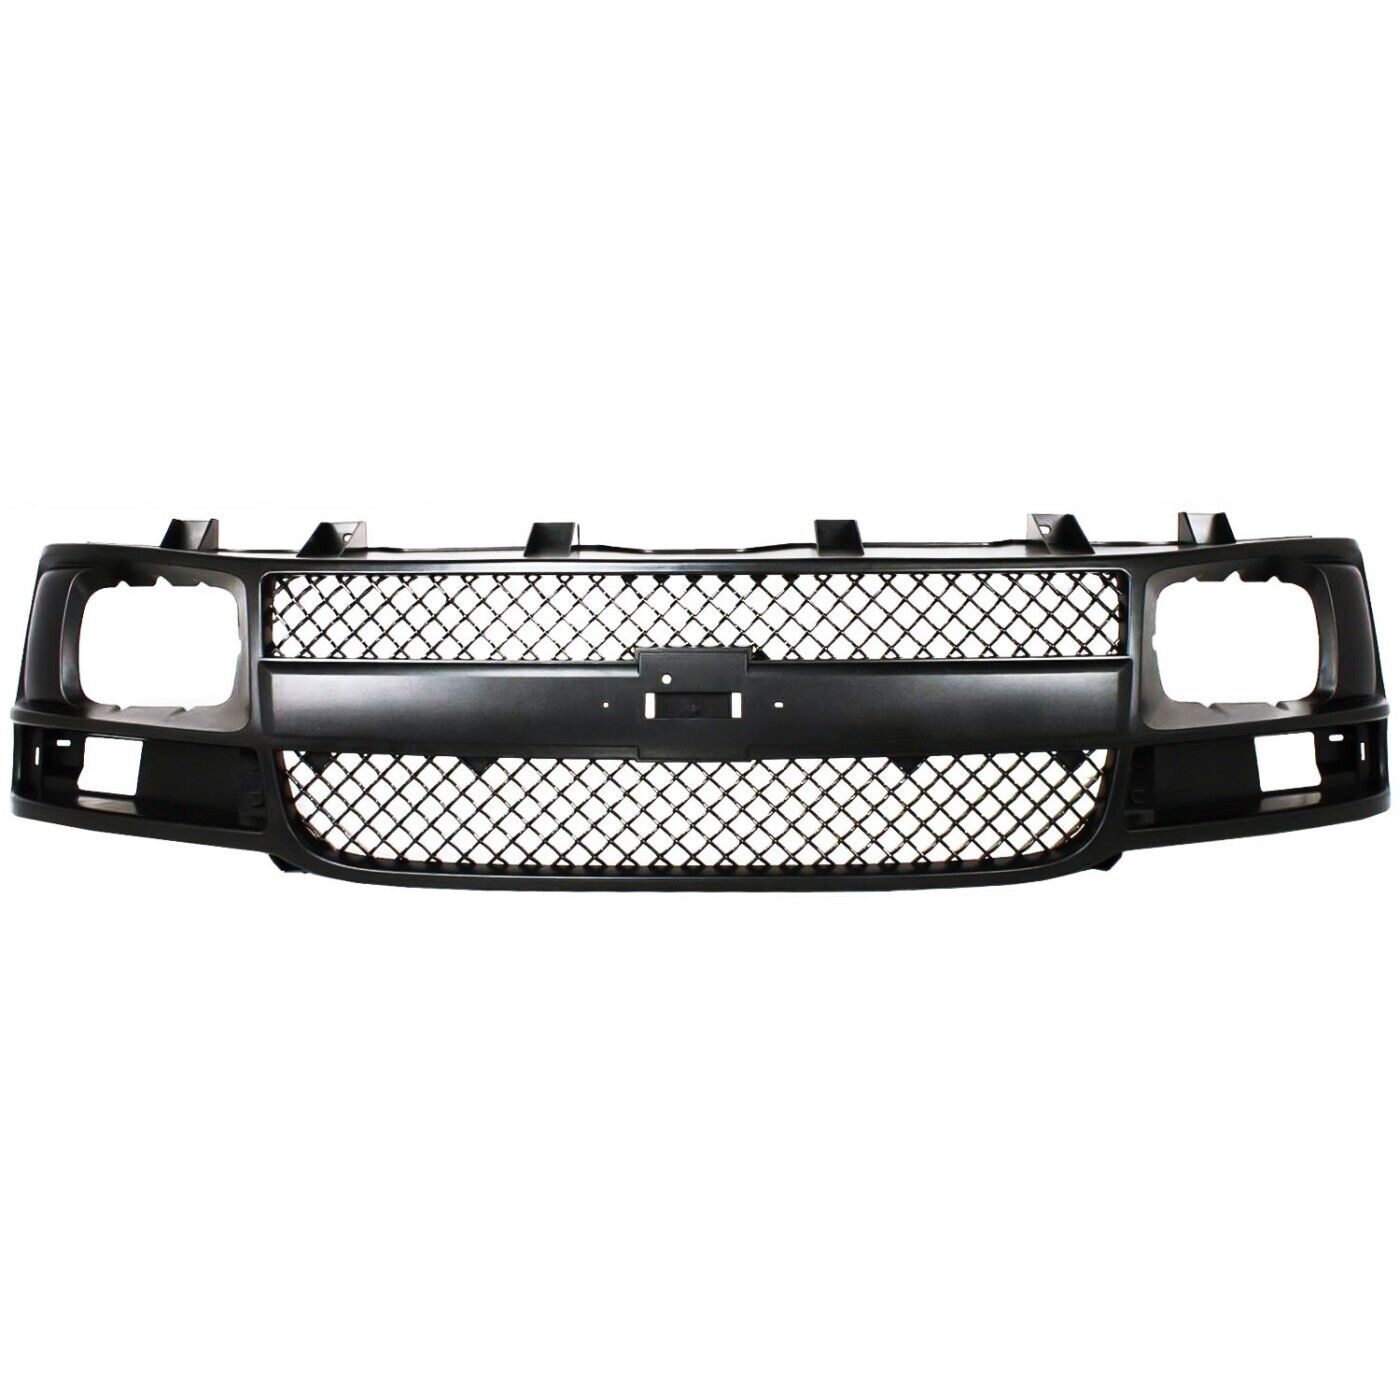 Grille Assembly For 2003-2017 Chevrolet Express 1500 2500 3500 GMC Savana Van